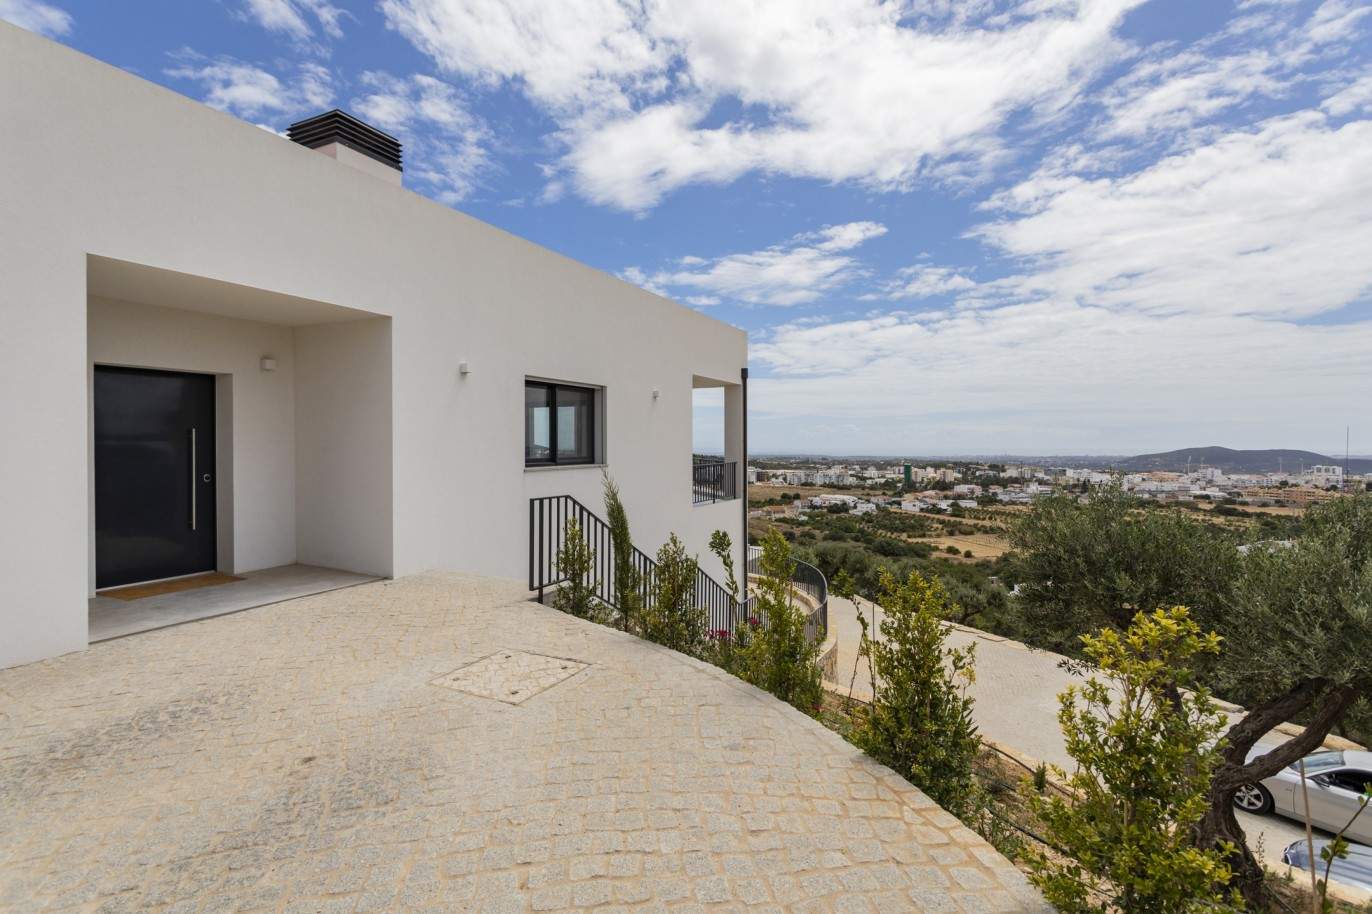 4 Bedroom Villa with swimming pool, for sale in S.Clemente, Loulé, Algarve_201789